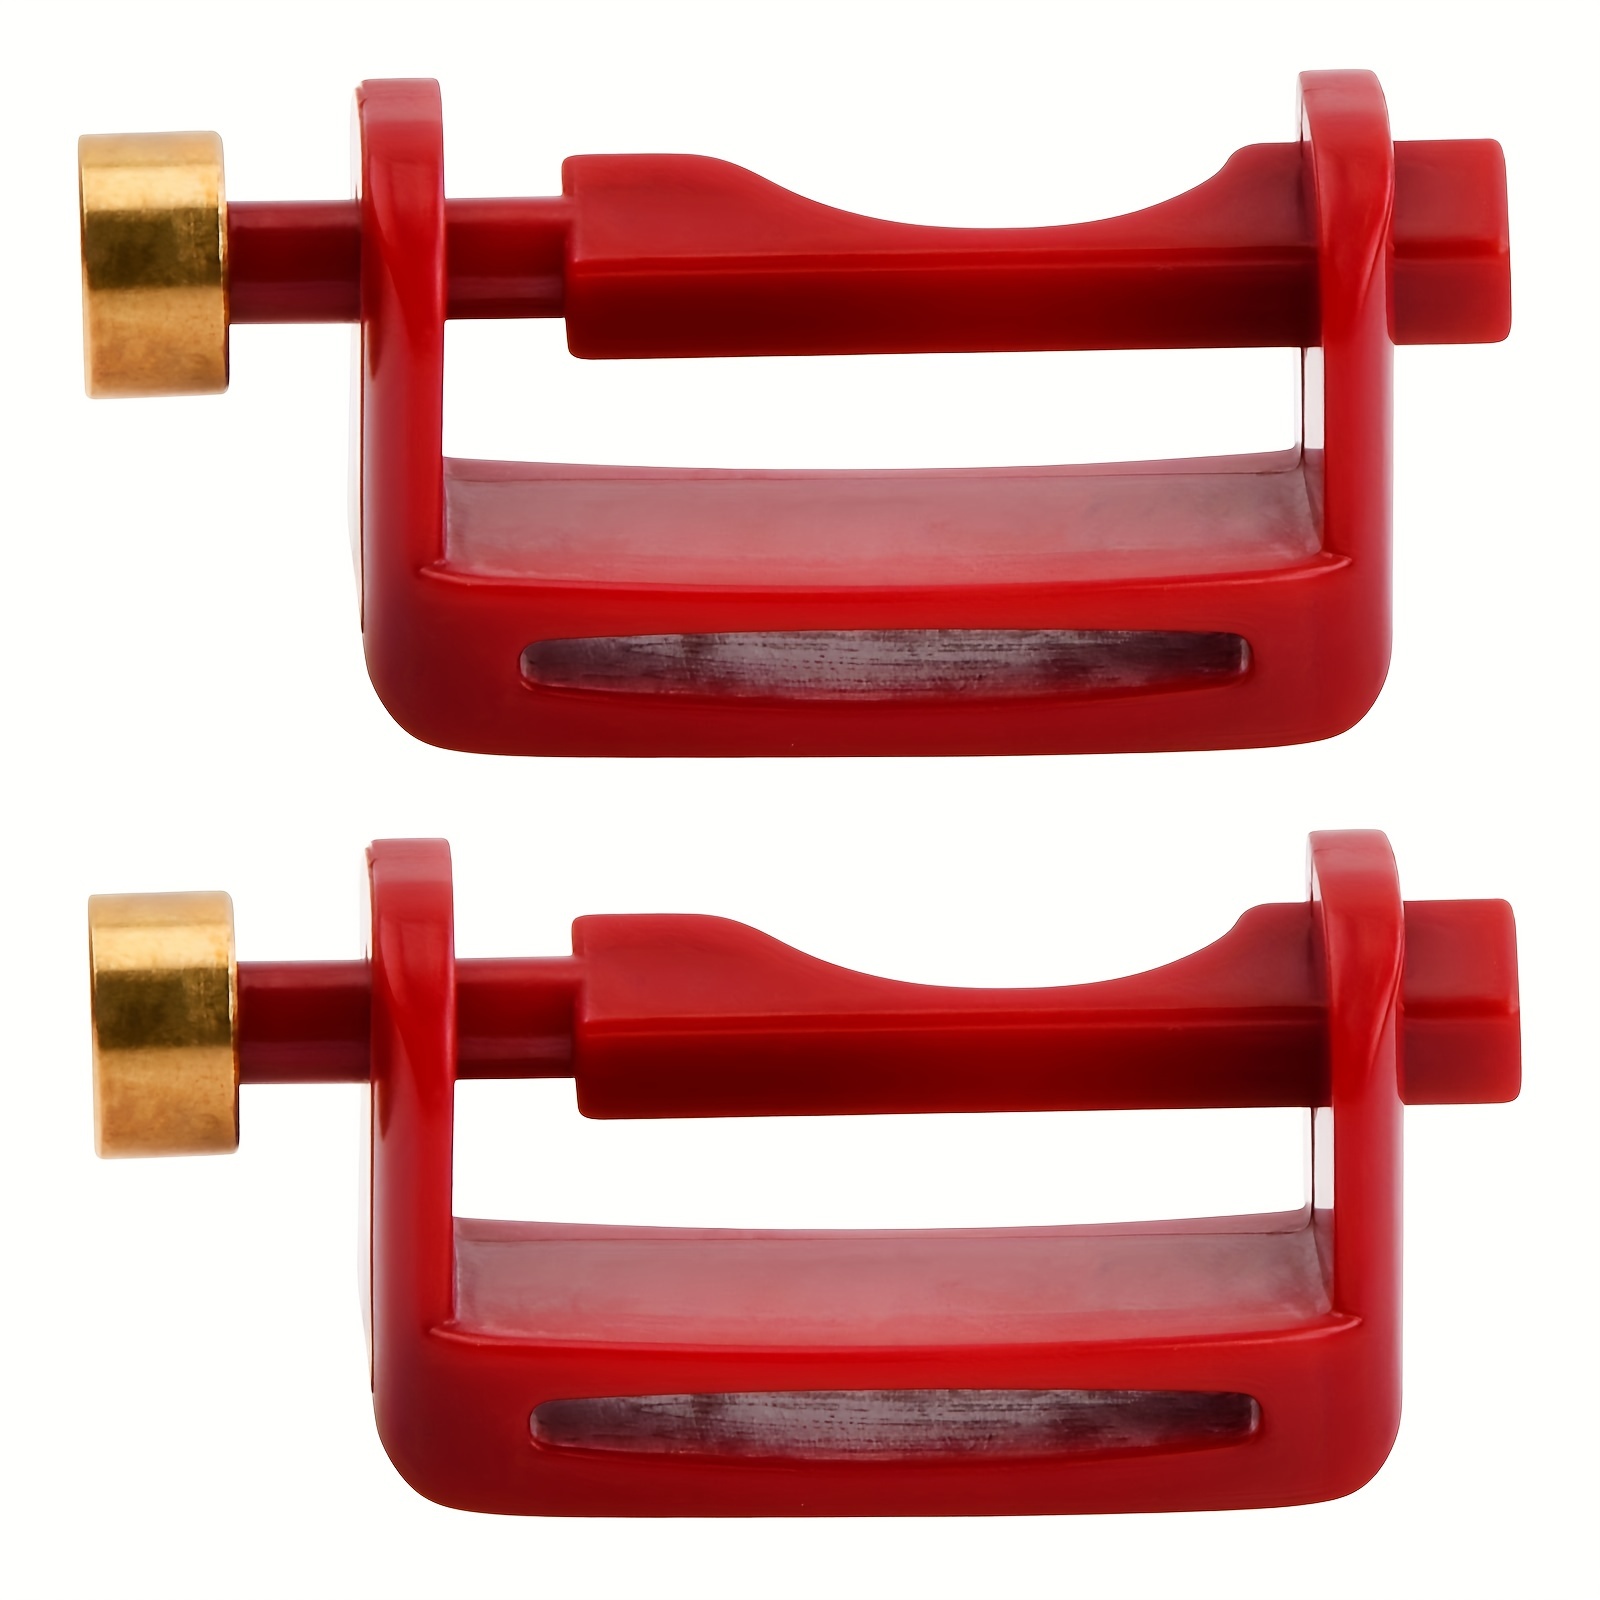 2pcs Vacuum Cleaner Trigger Lock ( ), Power Switch Holder For V6-v15  Models, Free Your Finger, Check Out Today's Deals Now